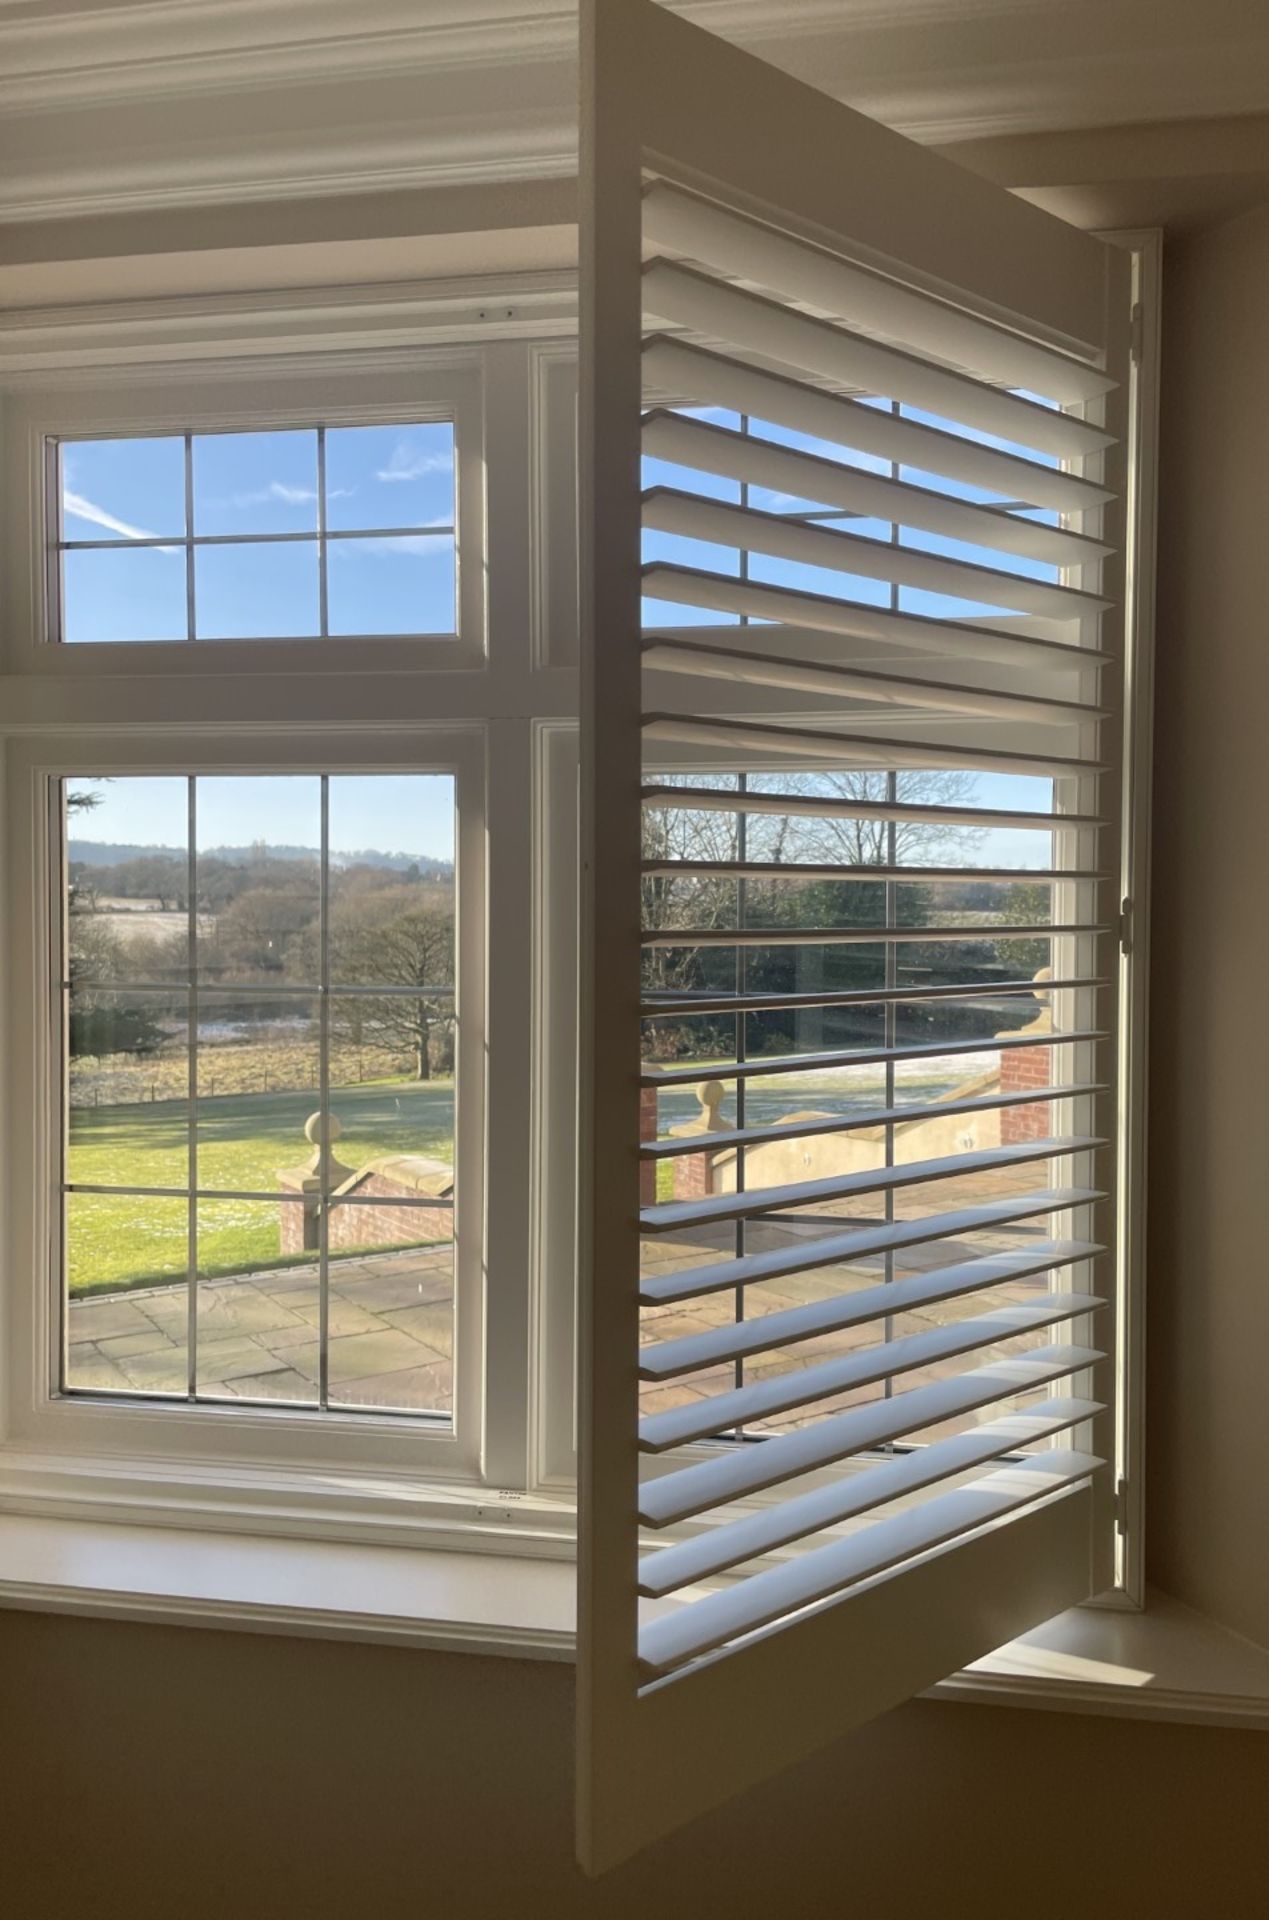 1 x Hardwood Timber Double Glazed Window Frames fitted with Shutter Blinds, In White - Ref: PAN104 - Image 11 of 12